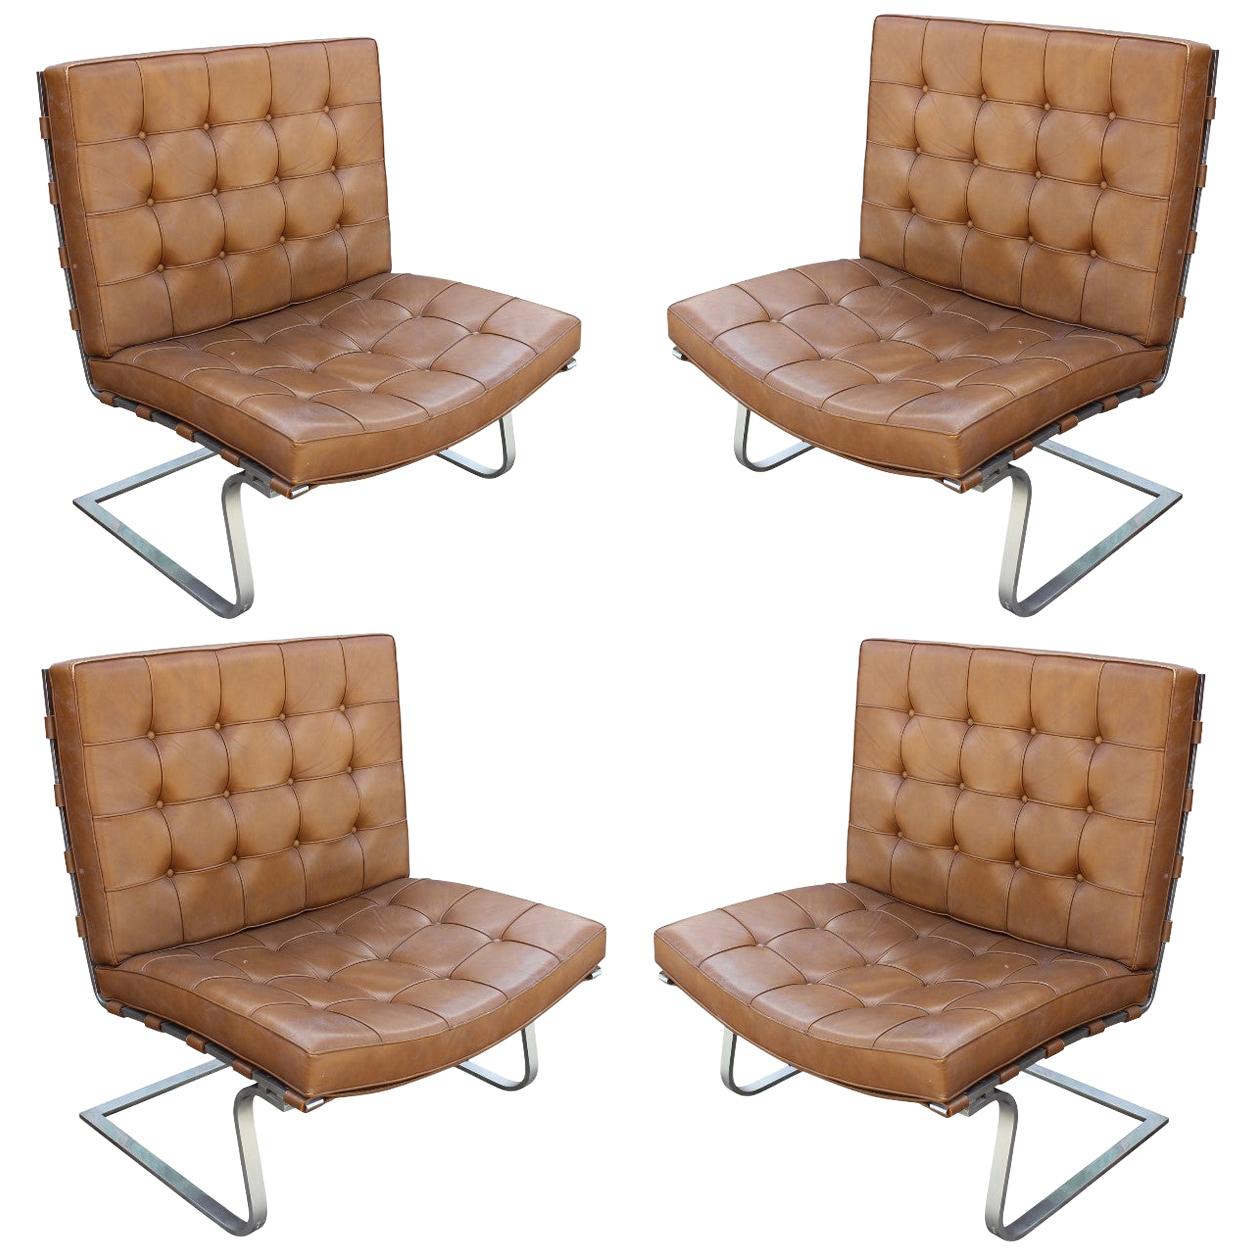 Set of Four Tufted Brown Leather Mies Van Der Rohe Tugendhat Chairs